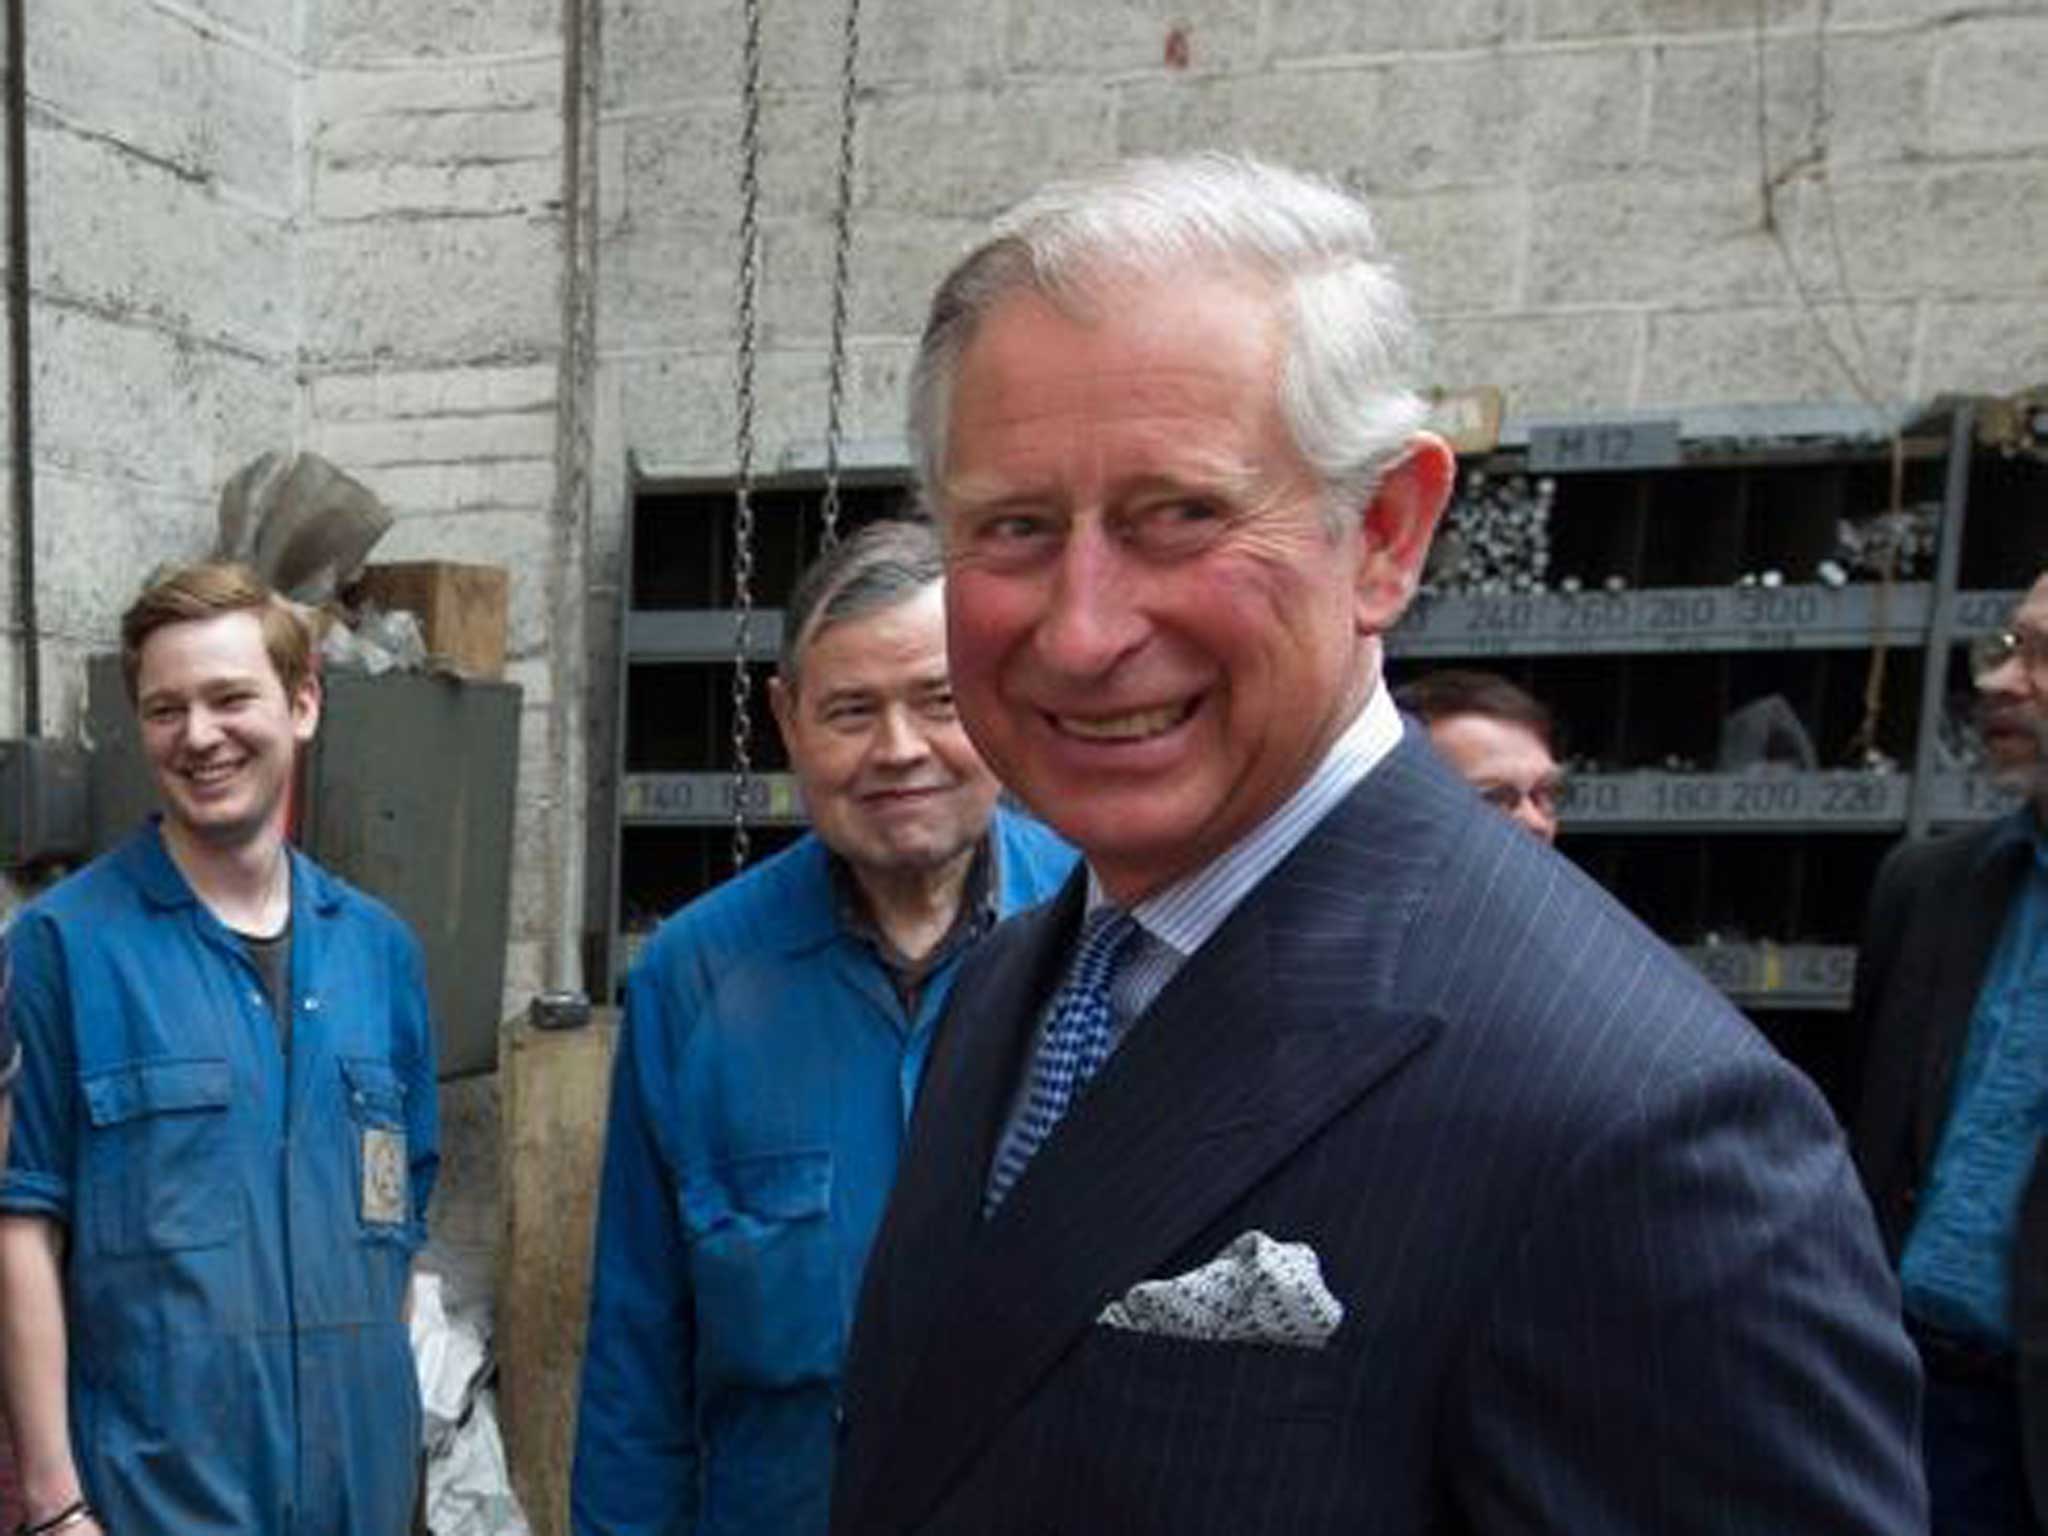 Private remarks by Prince Charles indicate he wasn't concerned about Australia becoming a republic